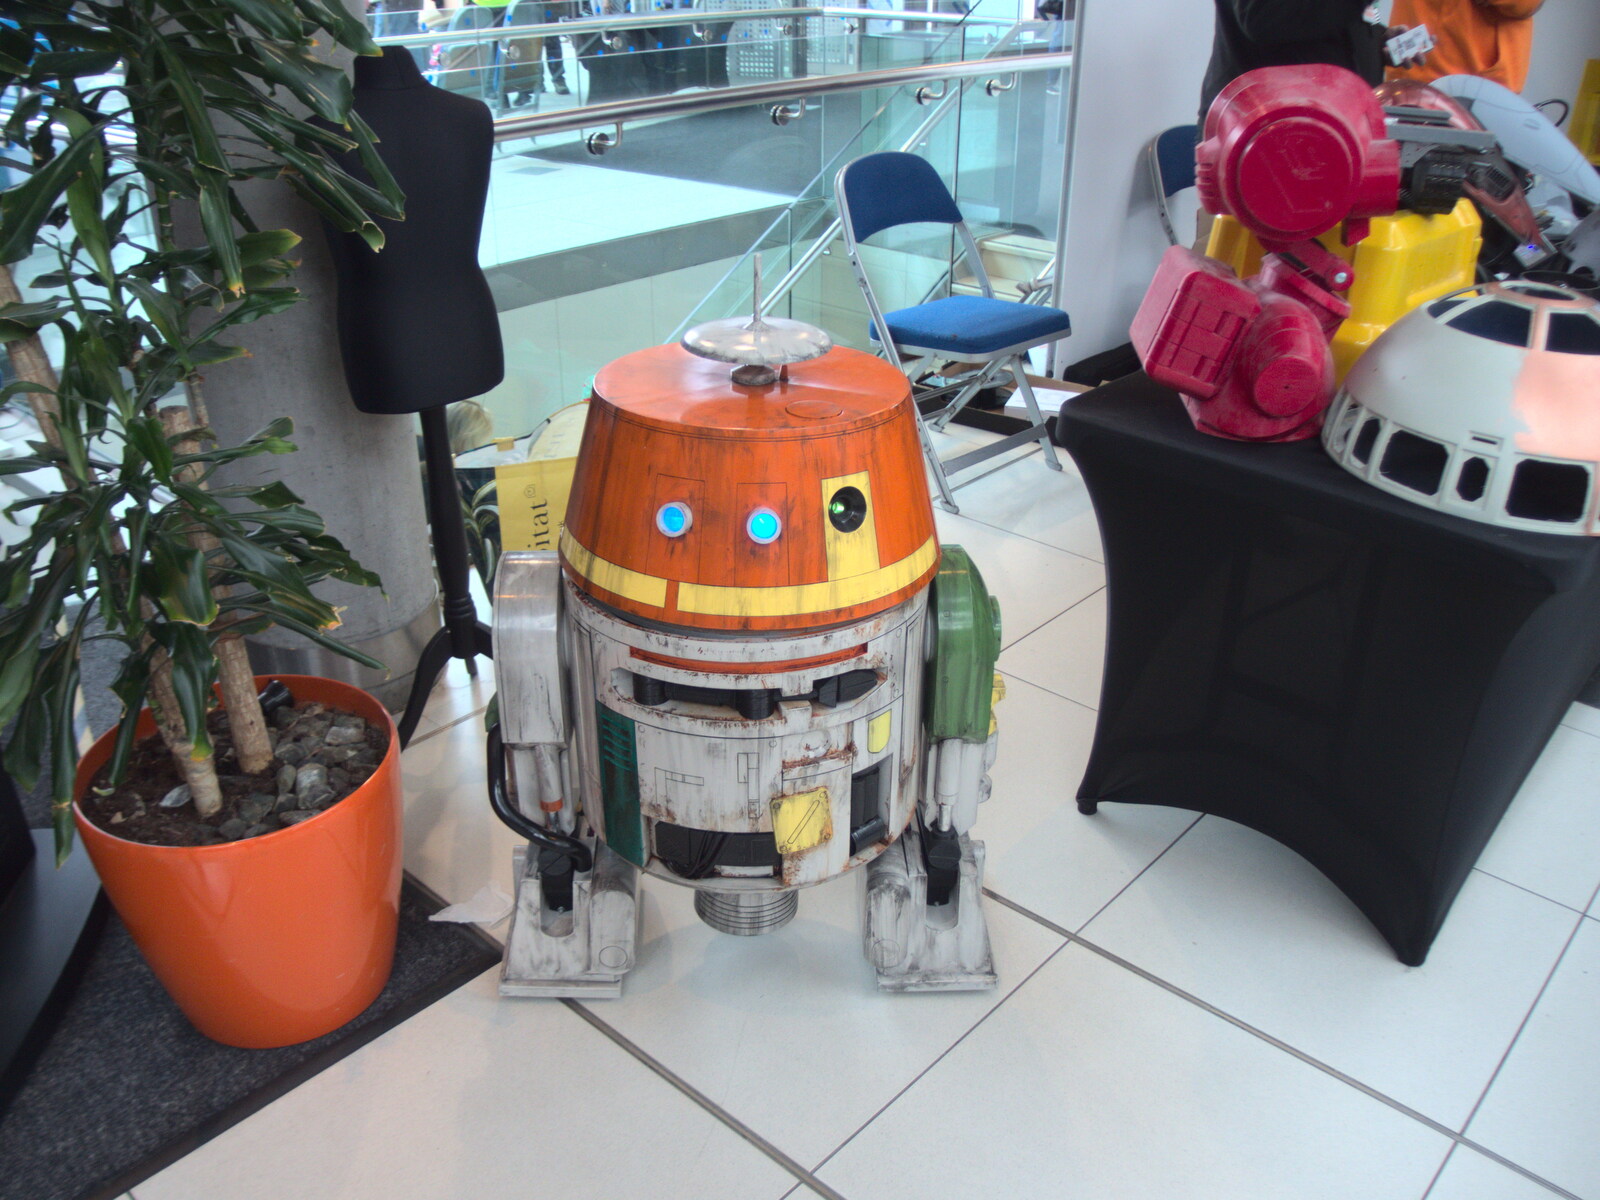 A cool 3D-printed C1-10P 'Chopper' droid from It's a Stitch Up: A Trip to Norwich, Norfolk - 18th March 2023